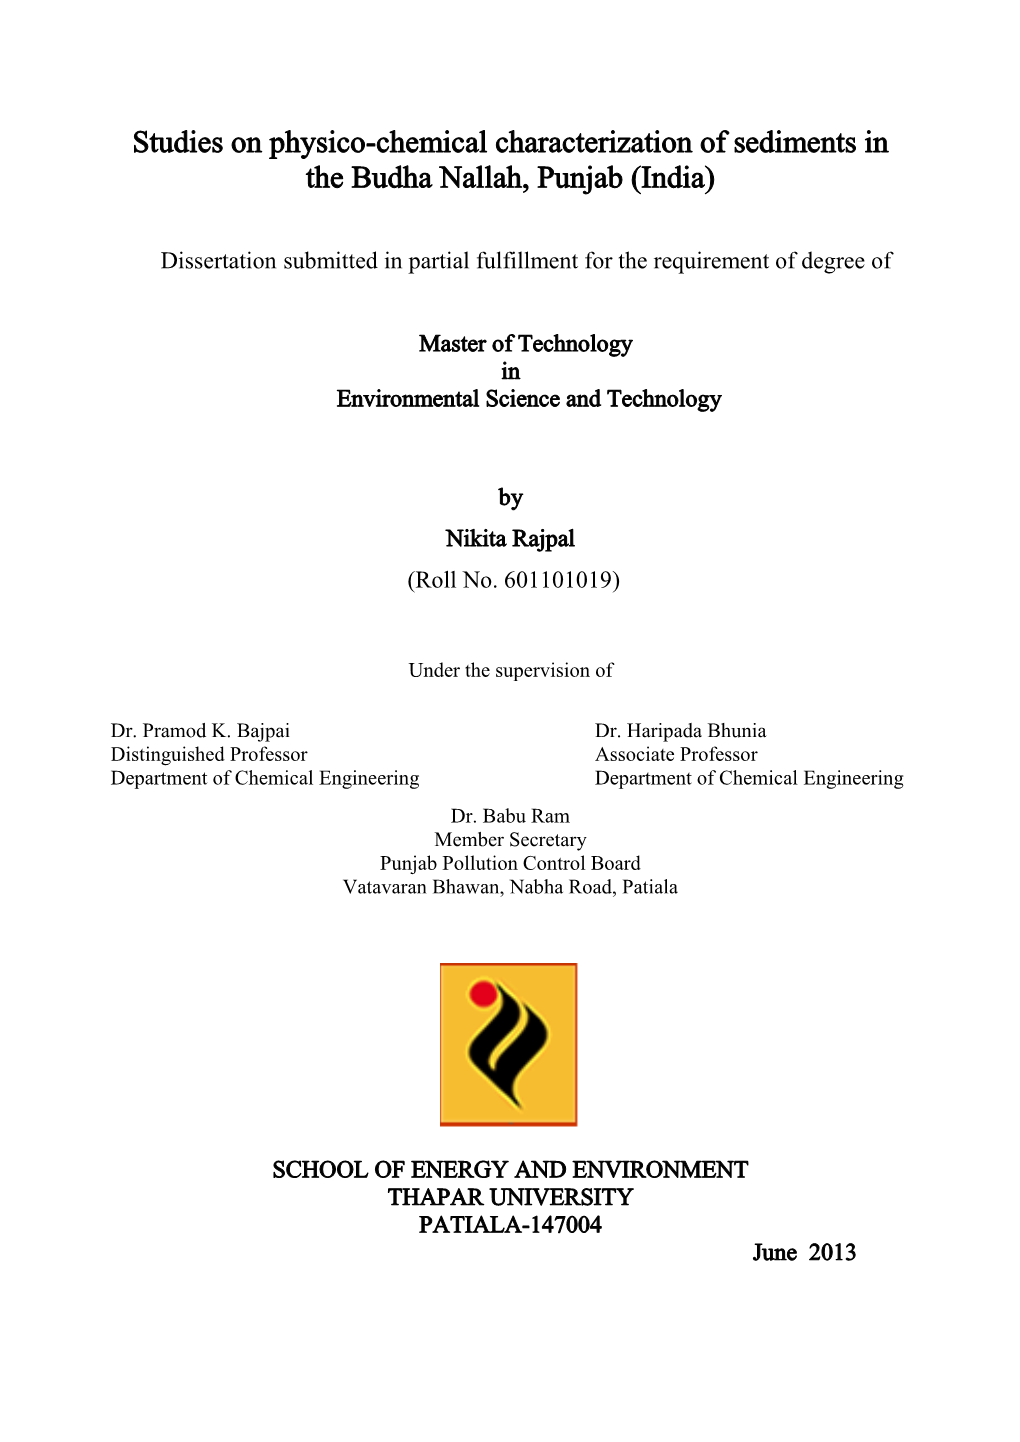 Studies on Physico-Chemical Characterization of Sediments in the Budha Nallah, Punjab (India)